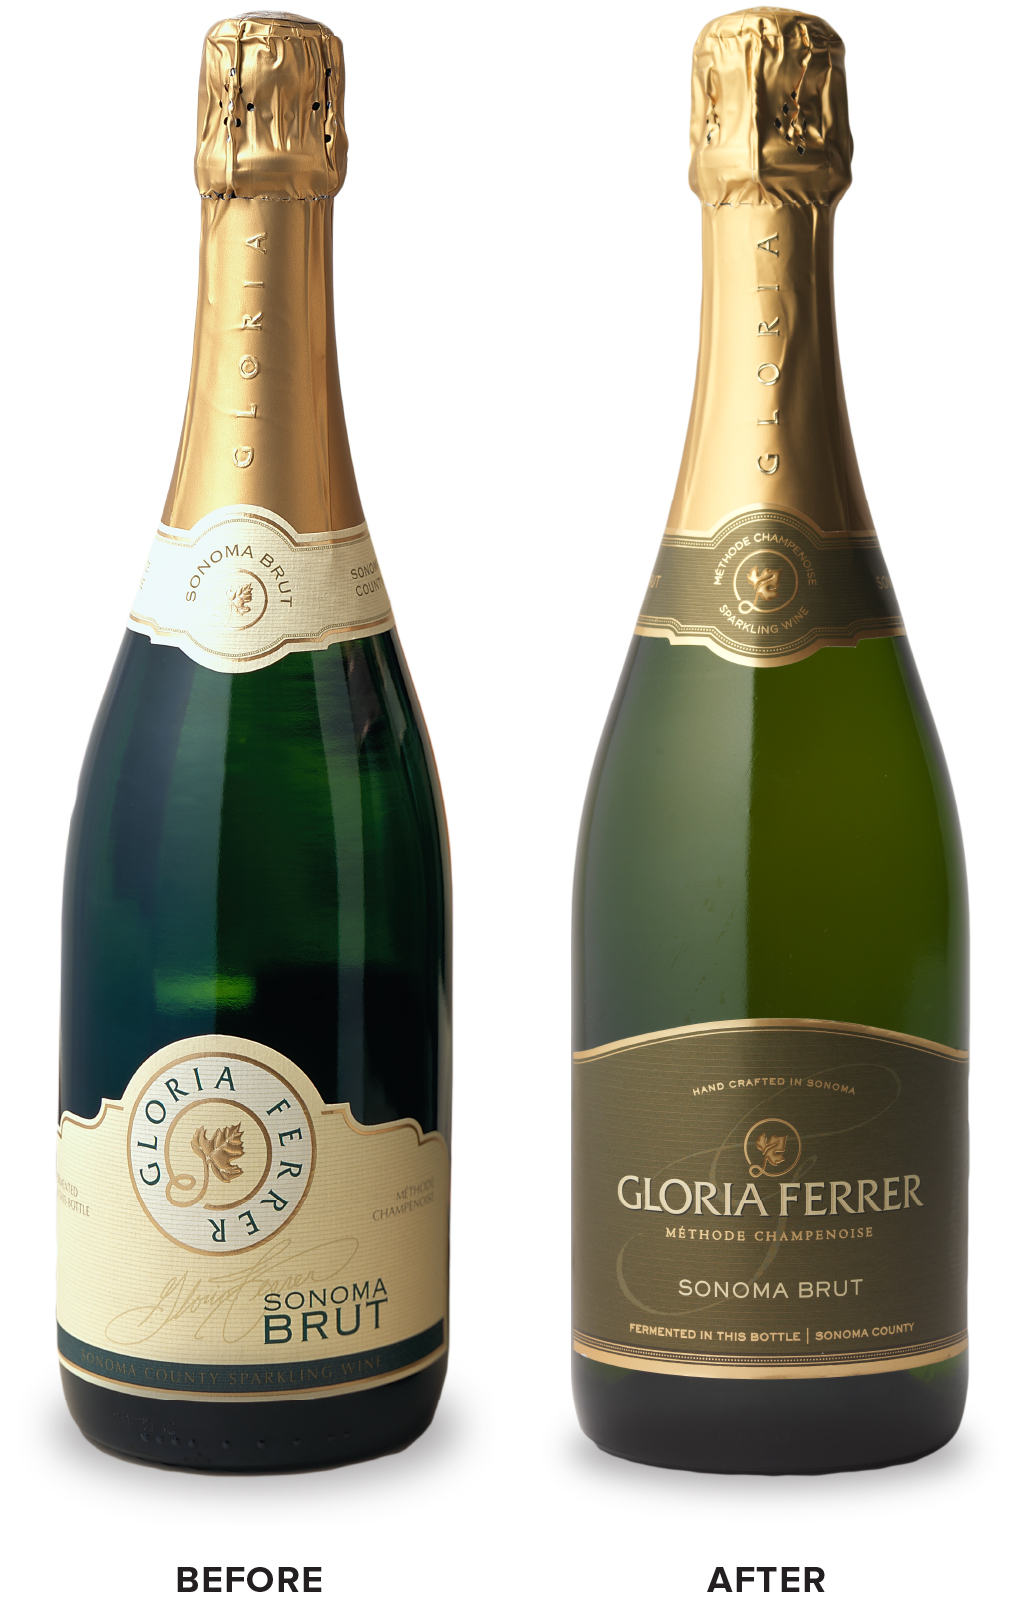 Gloria Ferrer Sonoma Brut Wine Packaging Before Redesign on Left & After on Right